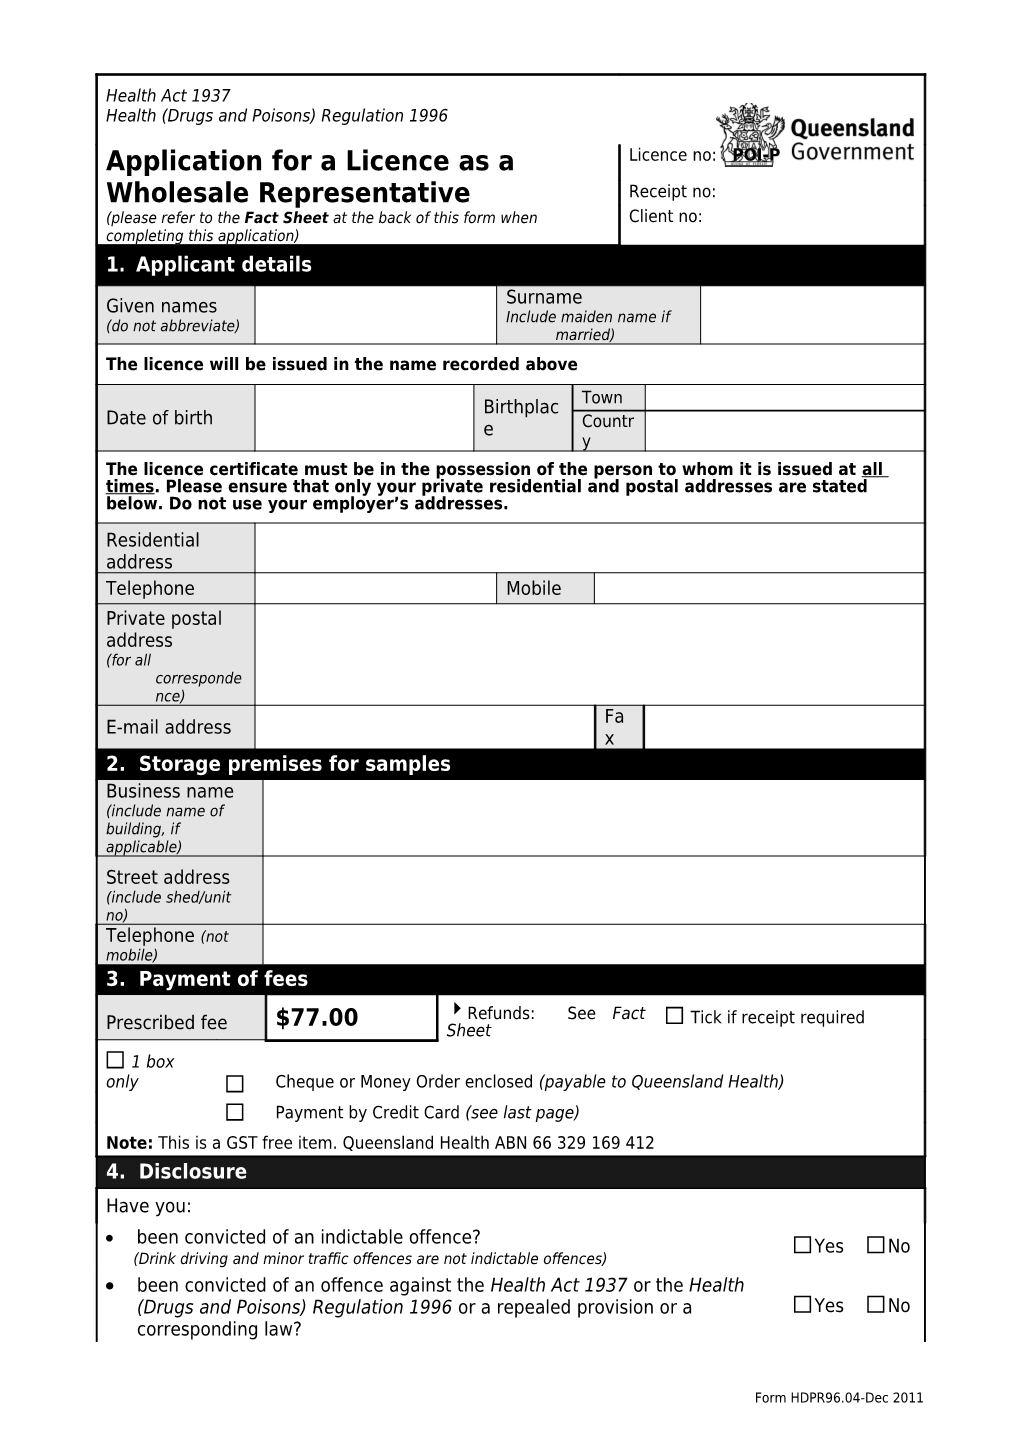 Application for a Licence As a Wholesale Representative